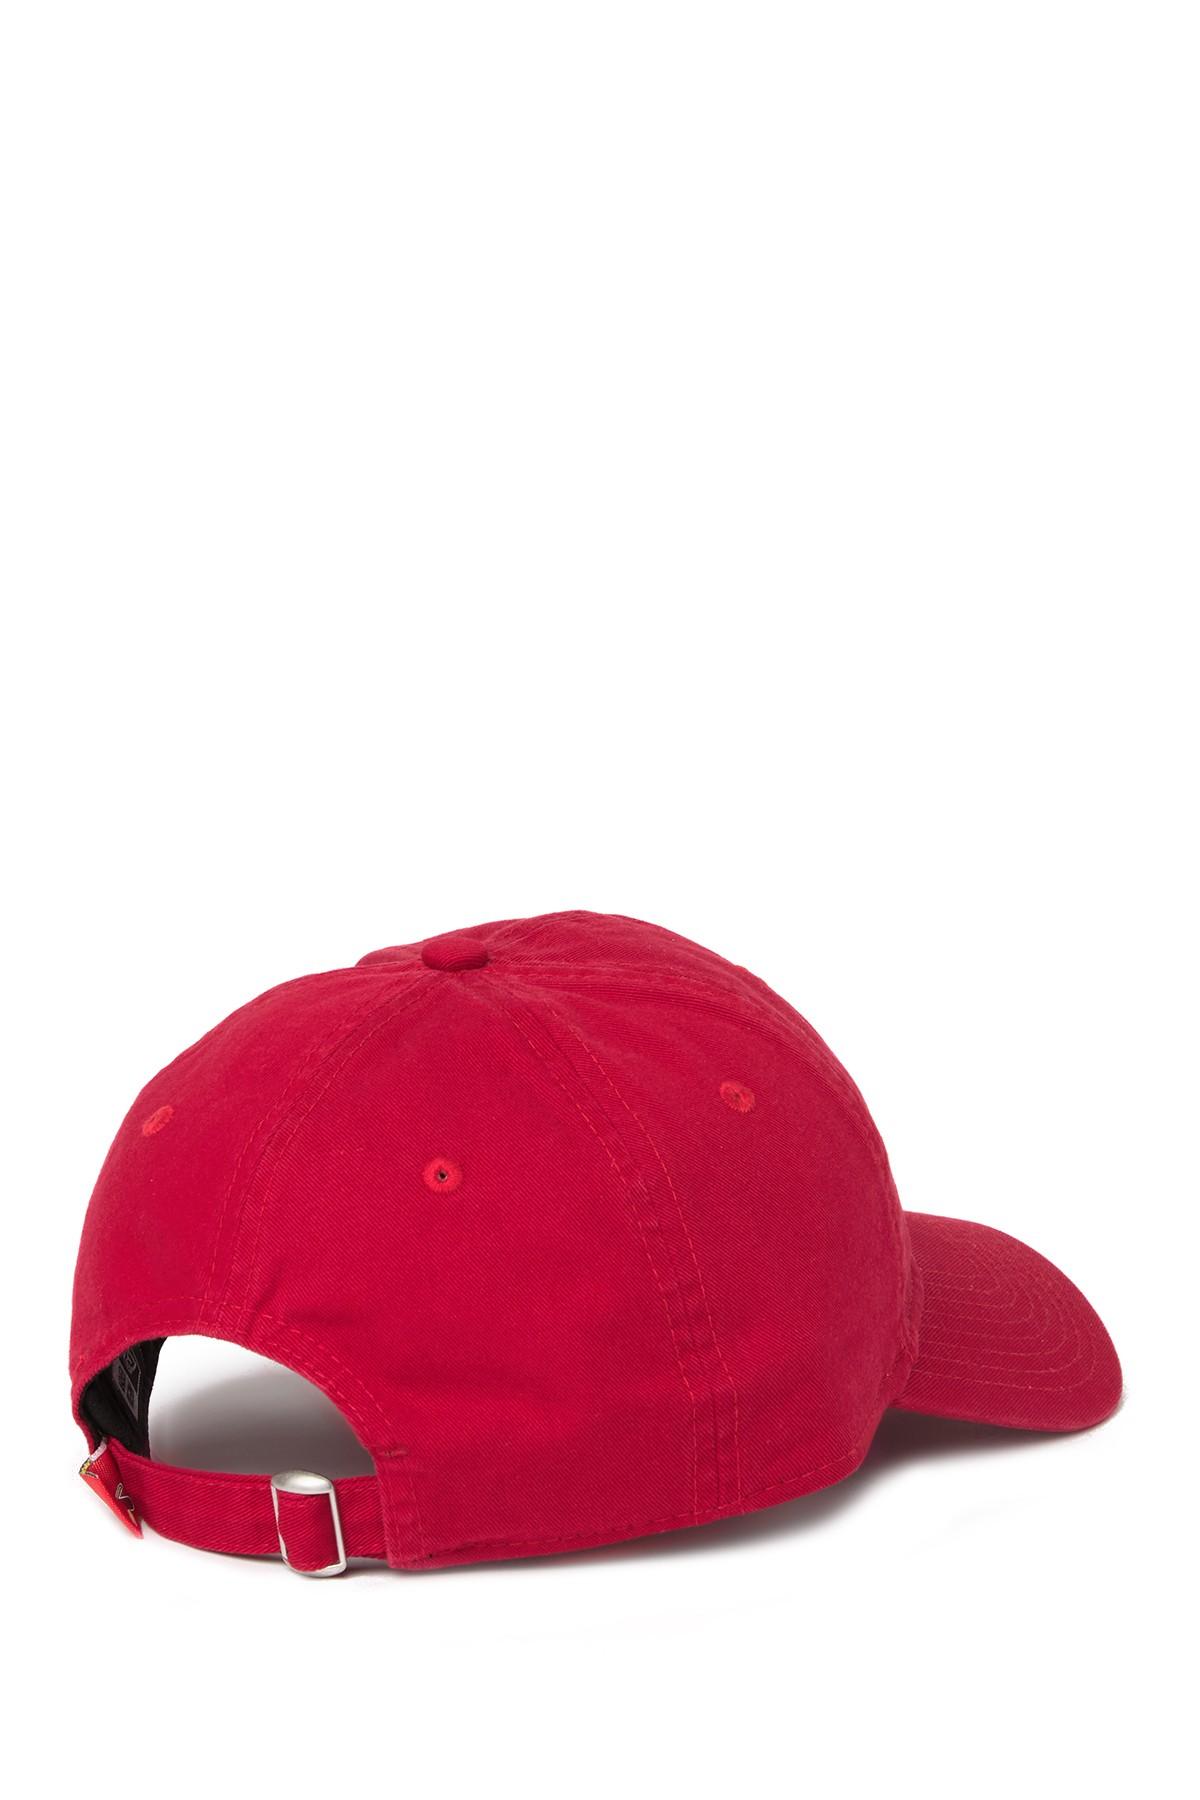 KTZ Mlb St. Louis Cardinals Core Classic Cap in Red for Men - Lyst